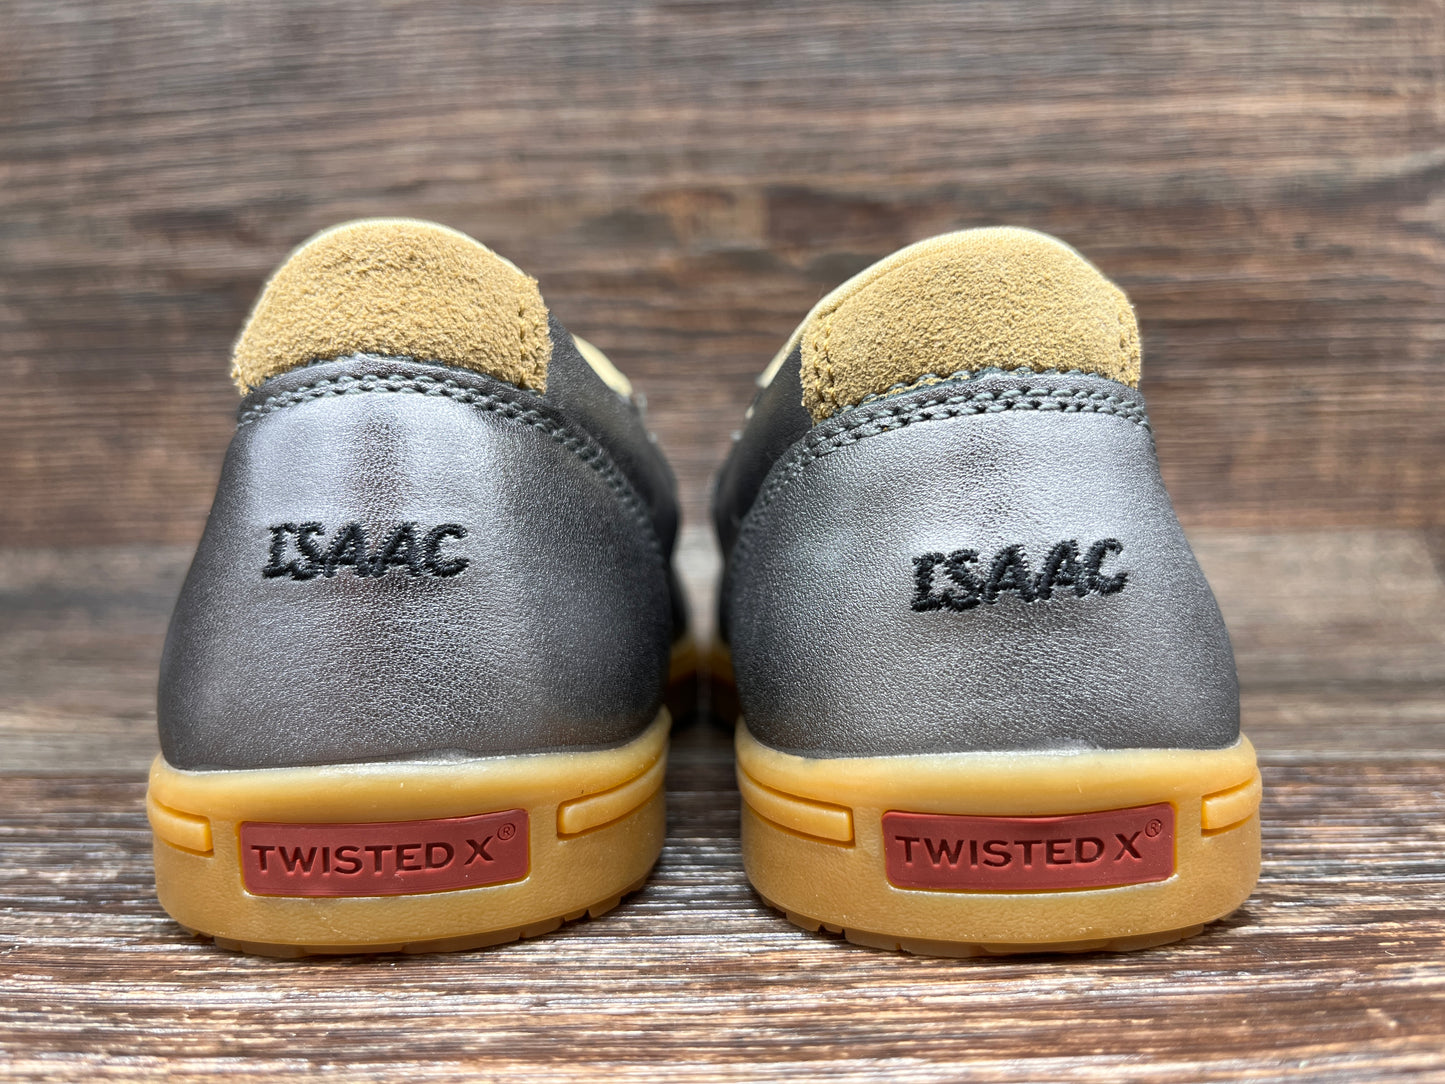 YCA0016 Twisted X Kid's Slip on Kicks Designed by Isaac of Cook Children's Medical Center